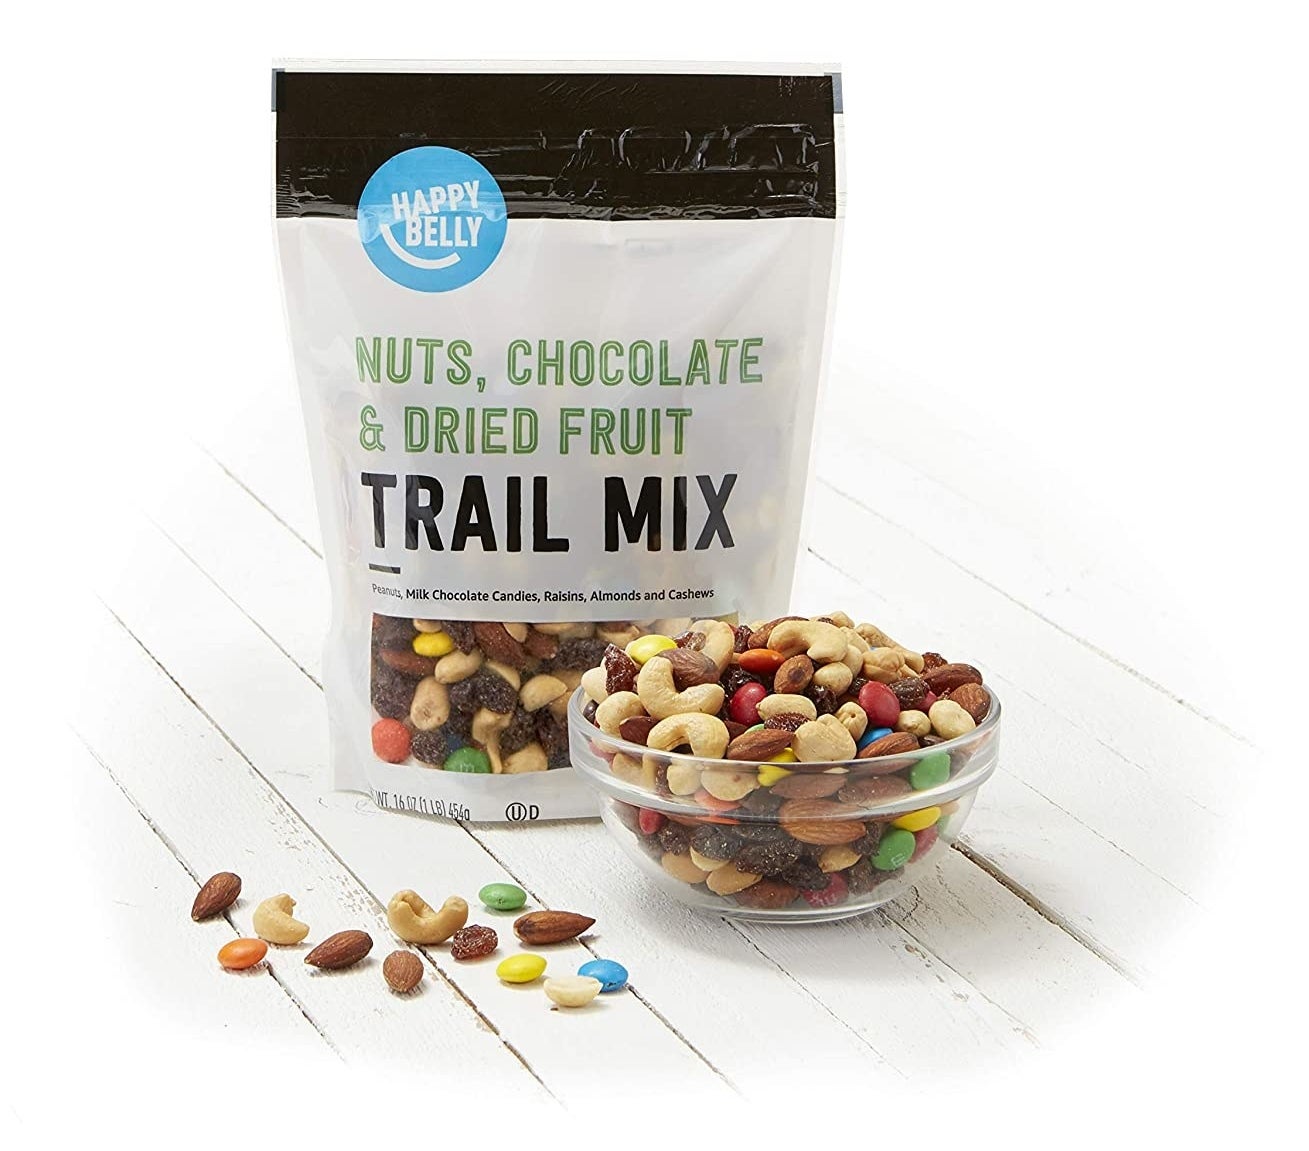 bag of trail mix next to a bowl filled with the trail mix